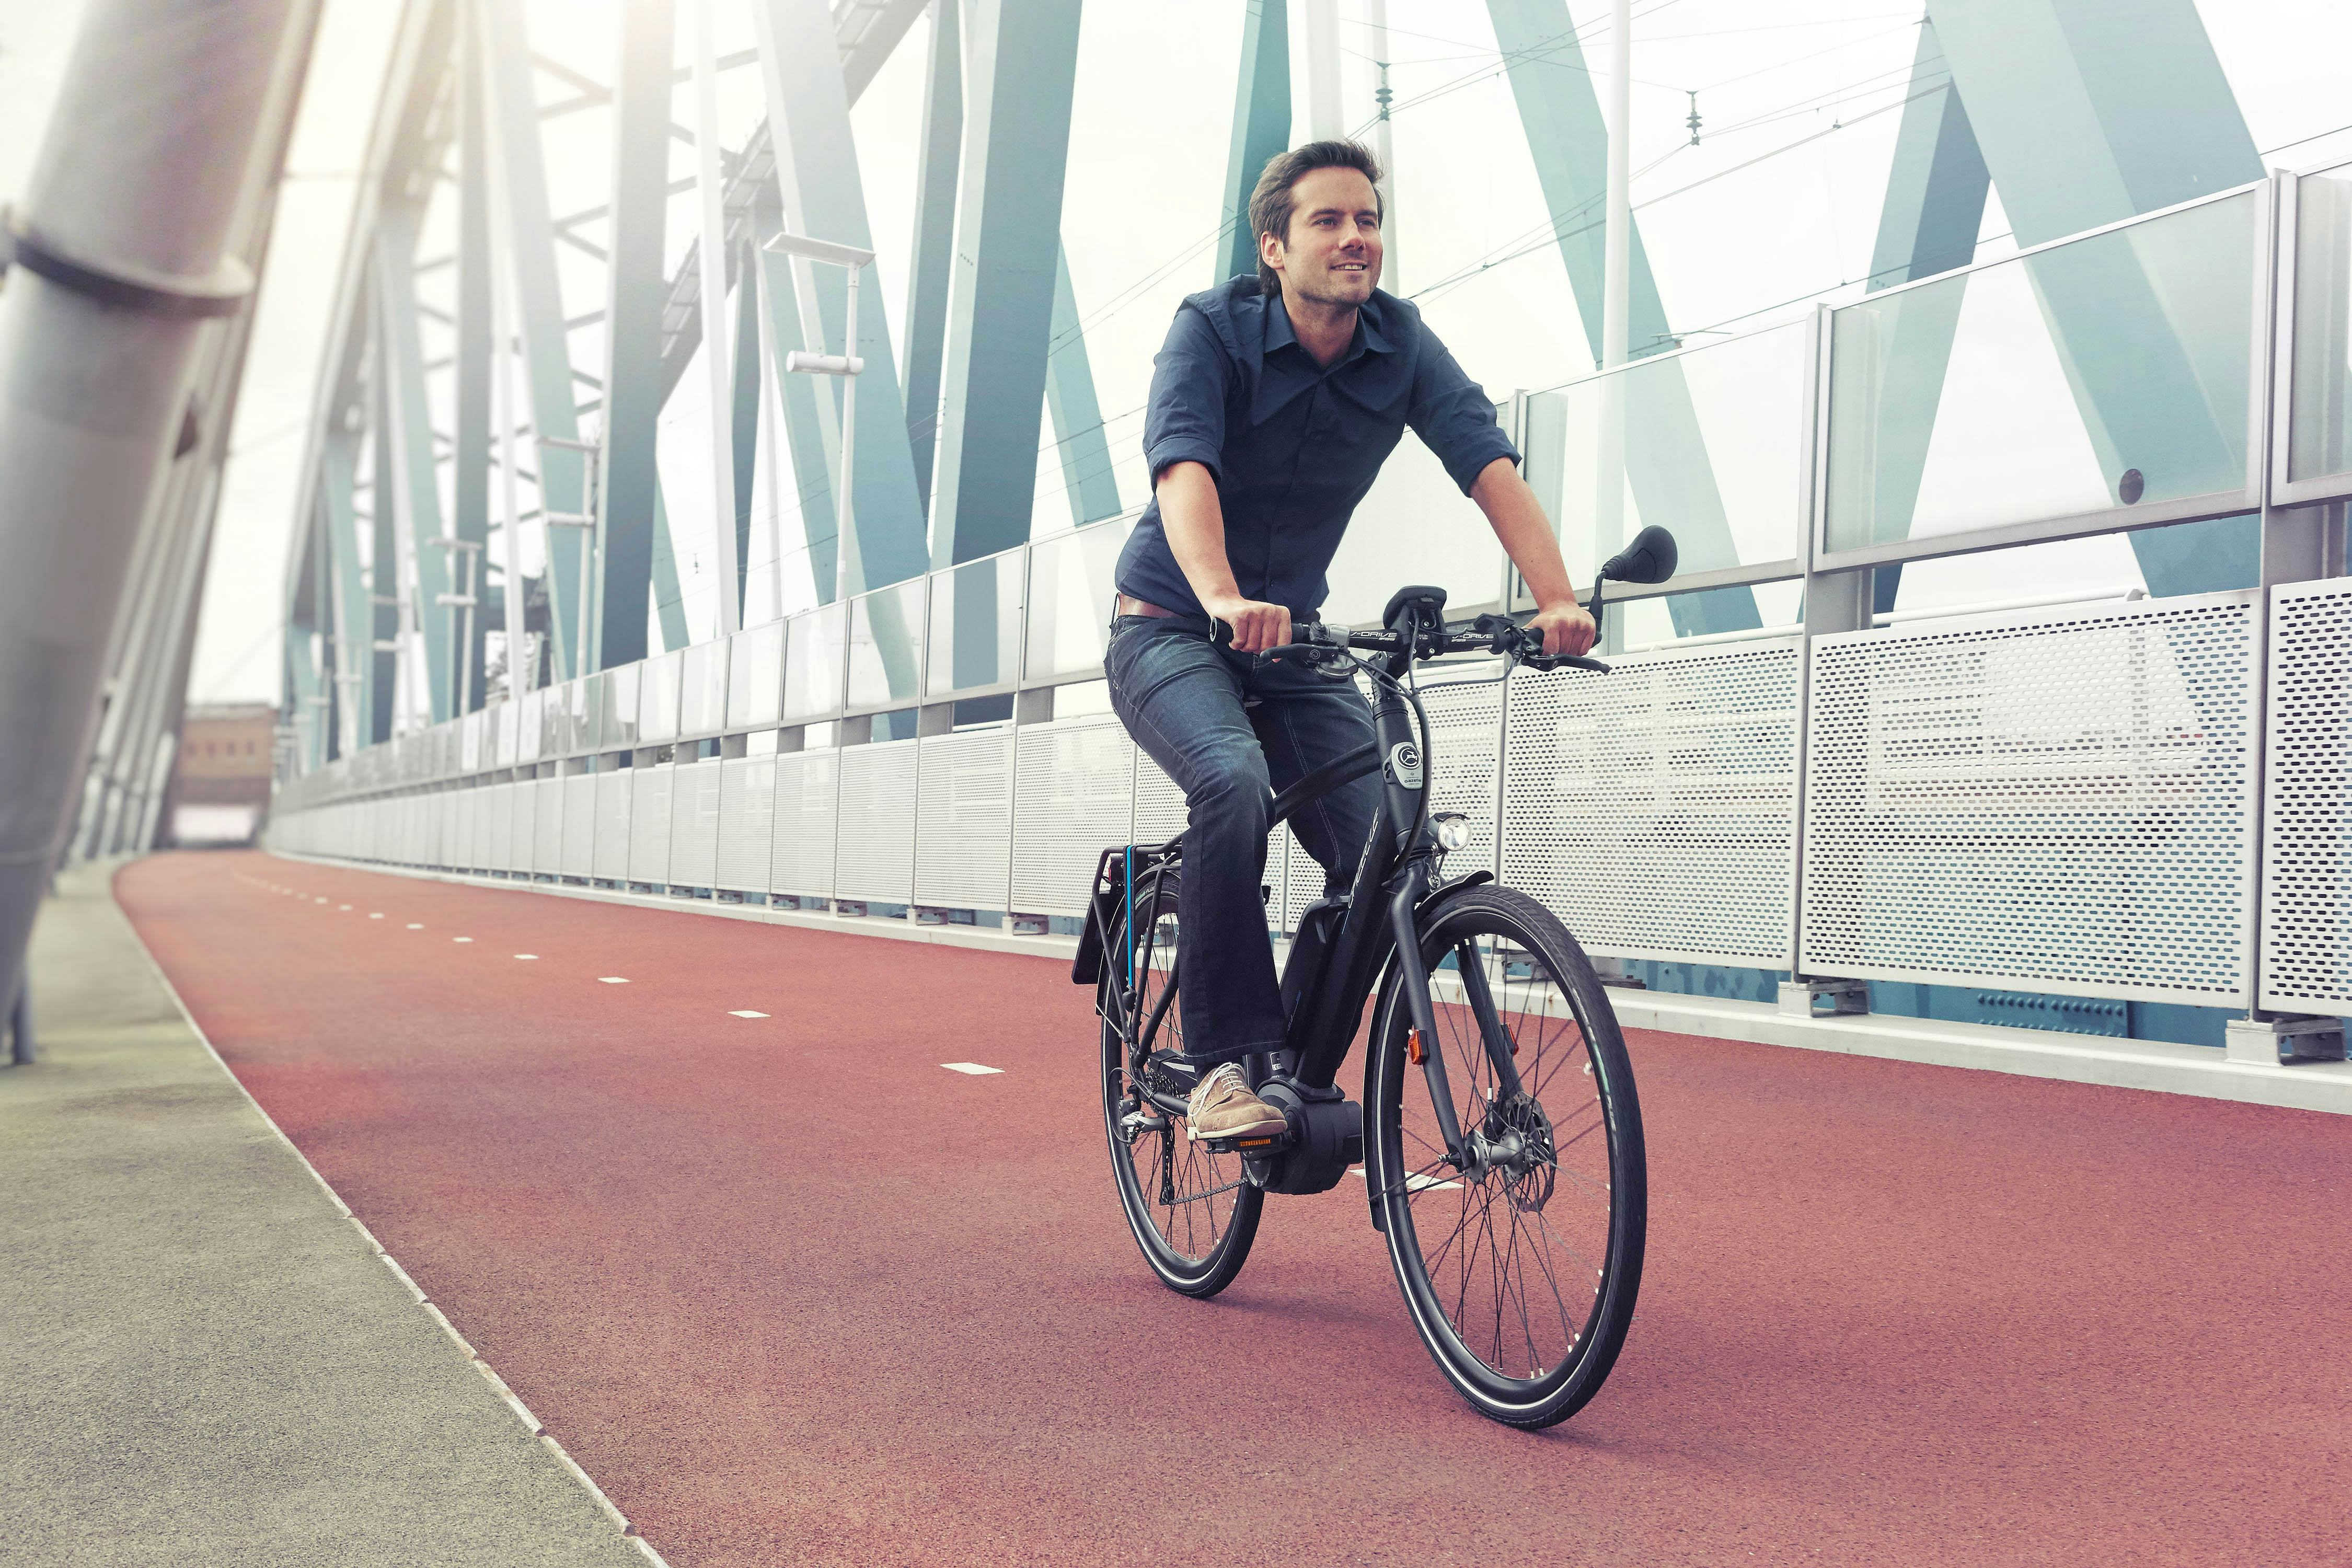 Mandatory insurance will cause blow to growing popularity of e-bikes across Europe. – Photo Gazelle